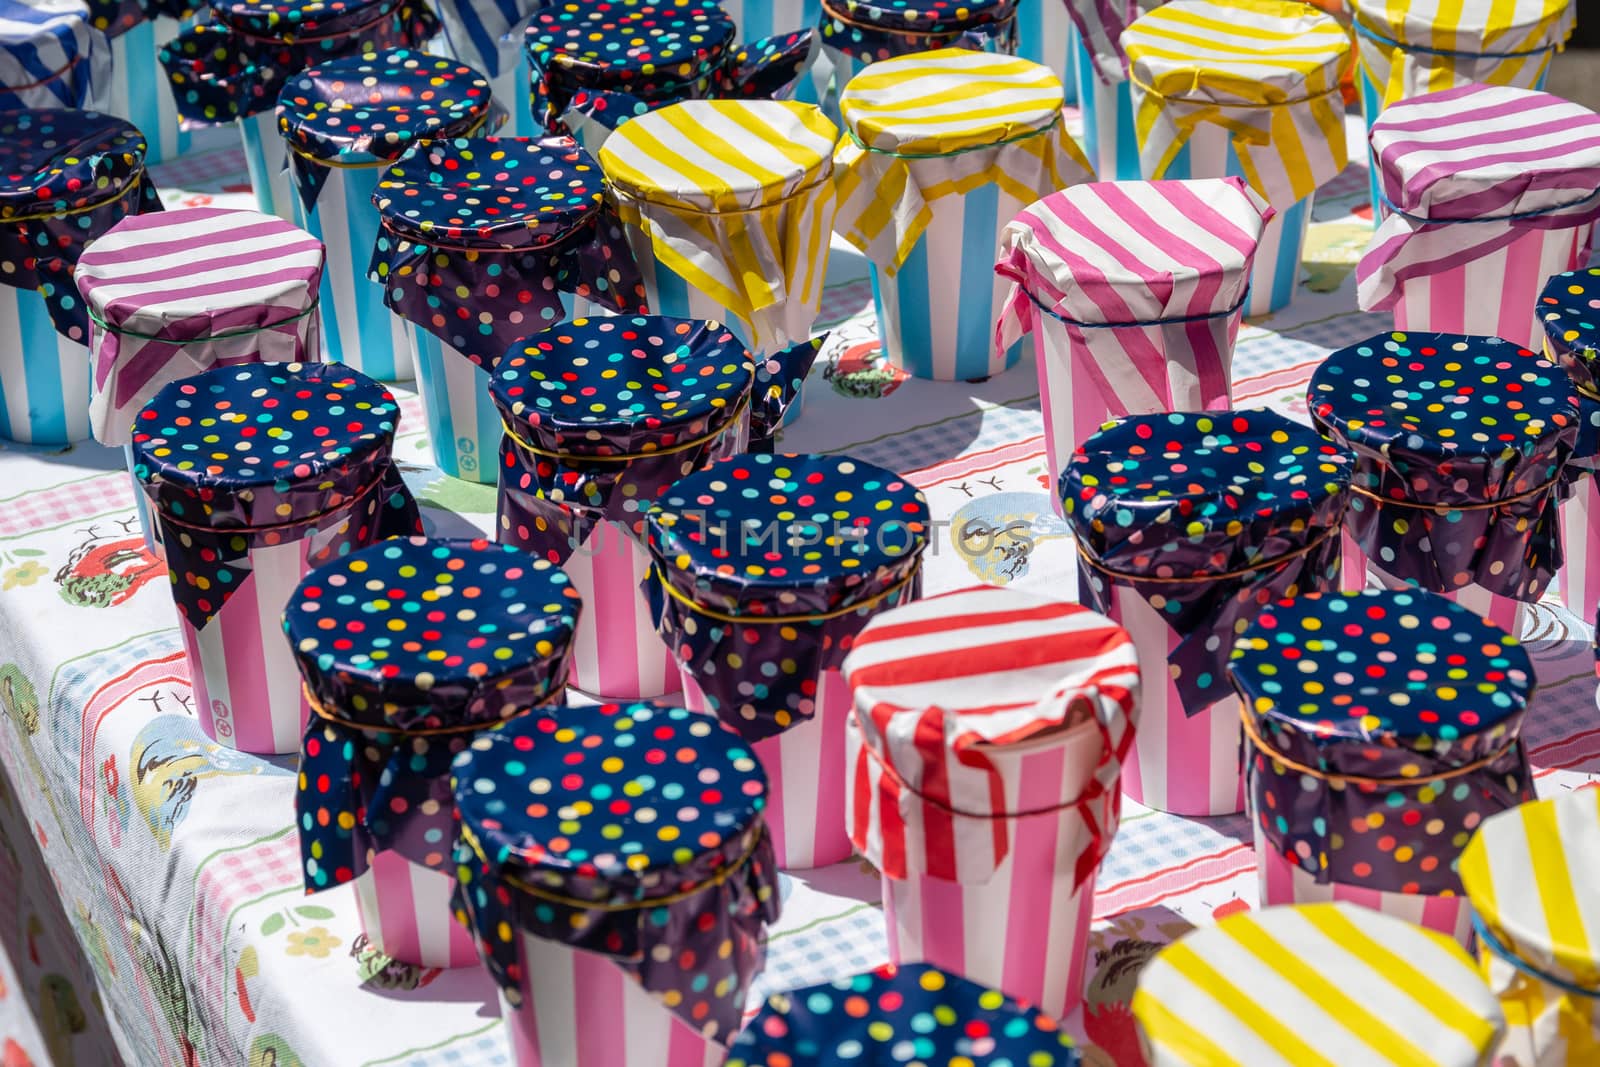 An assortment of colorful containers, on a table, covered with bright colorful paper and secured with elastic bands